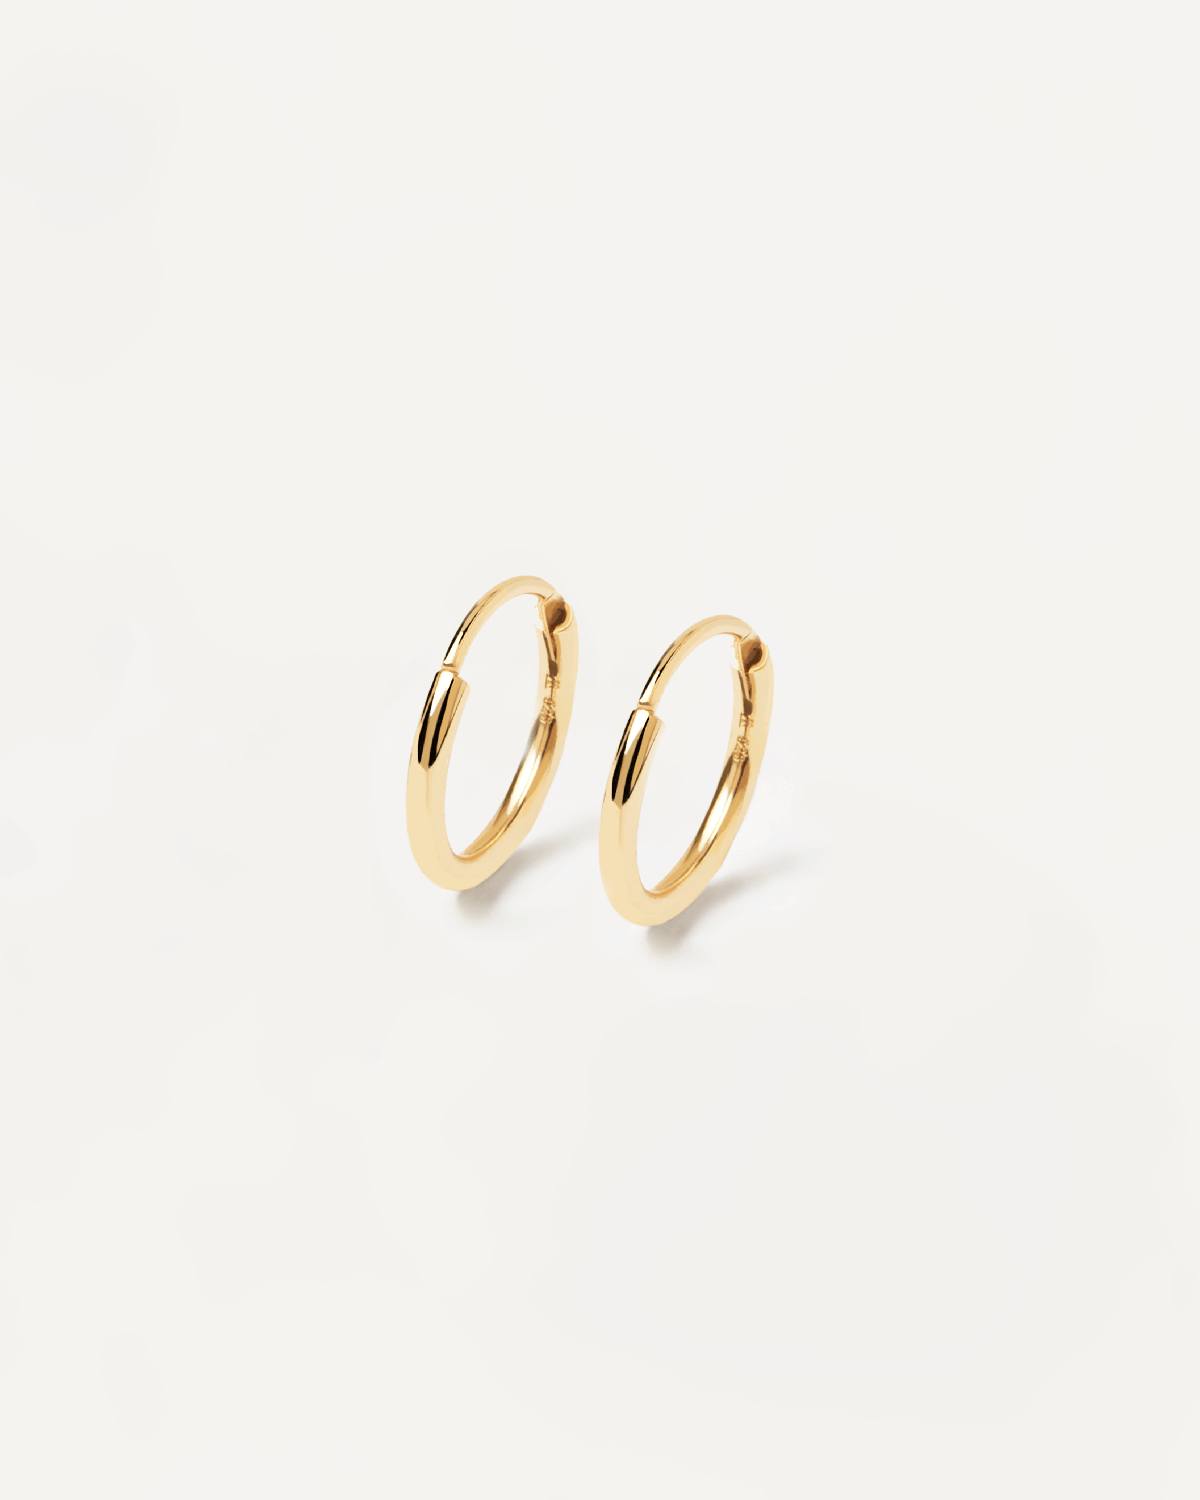 Mini Hoops Gold - 925 sterling silver / 18K gold plating